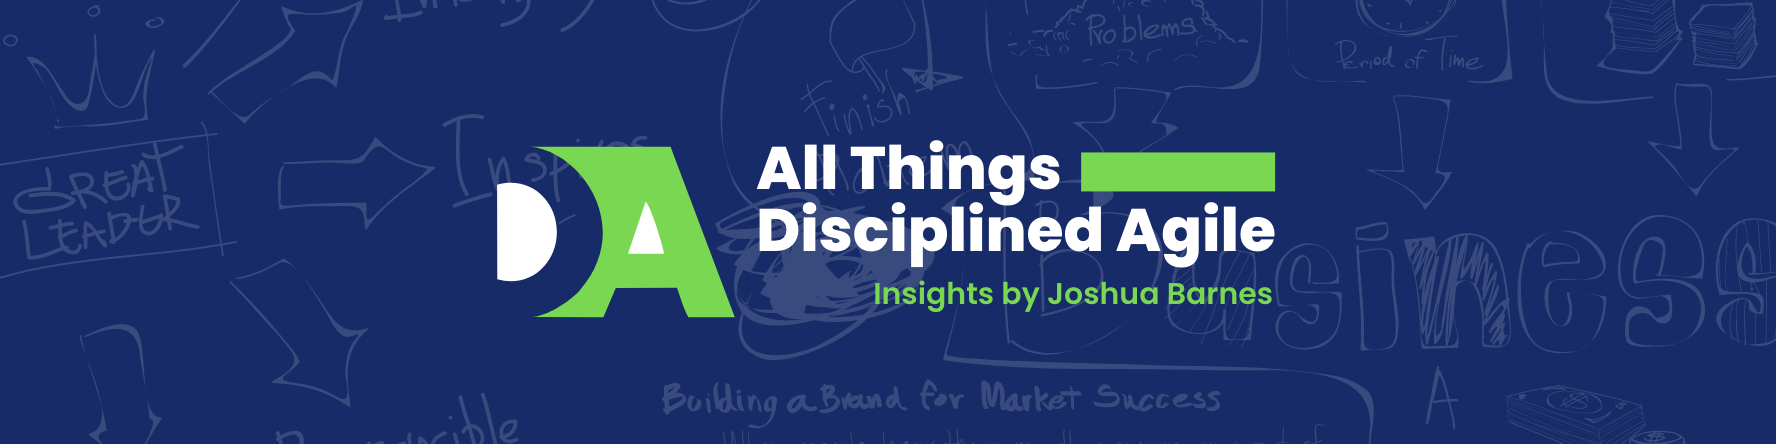 All Things Disciplined Agile